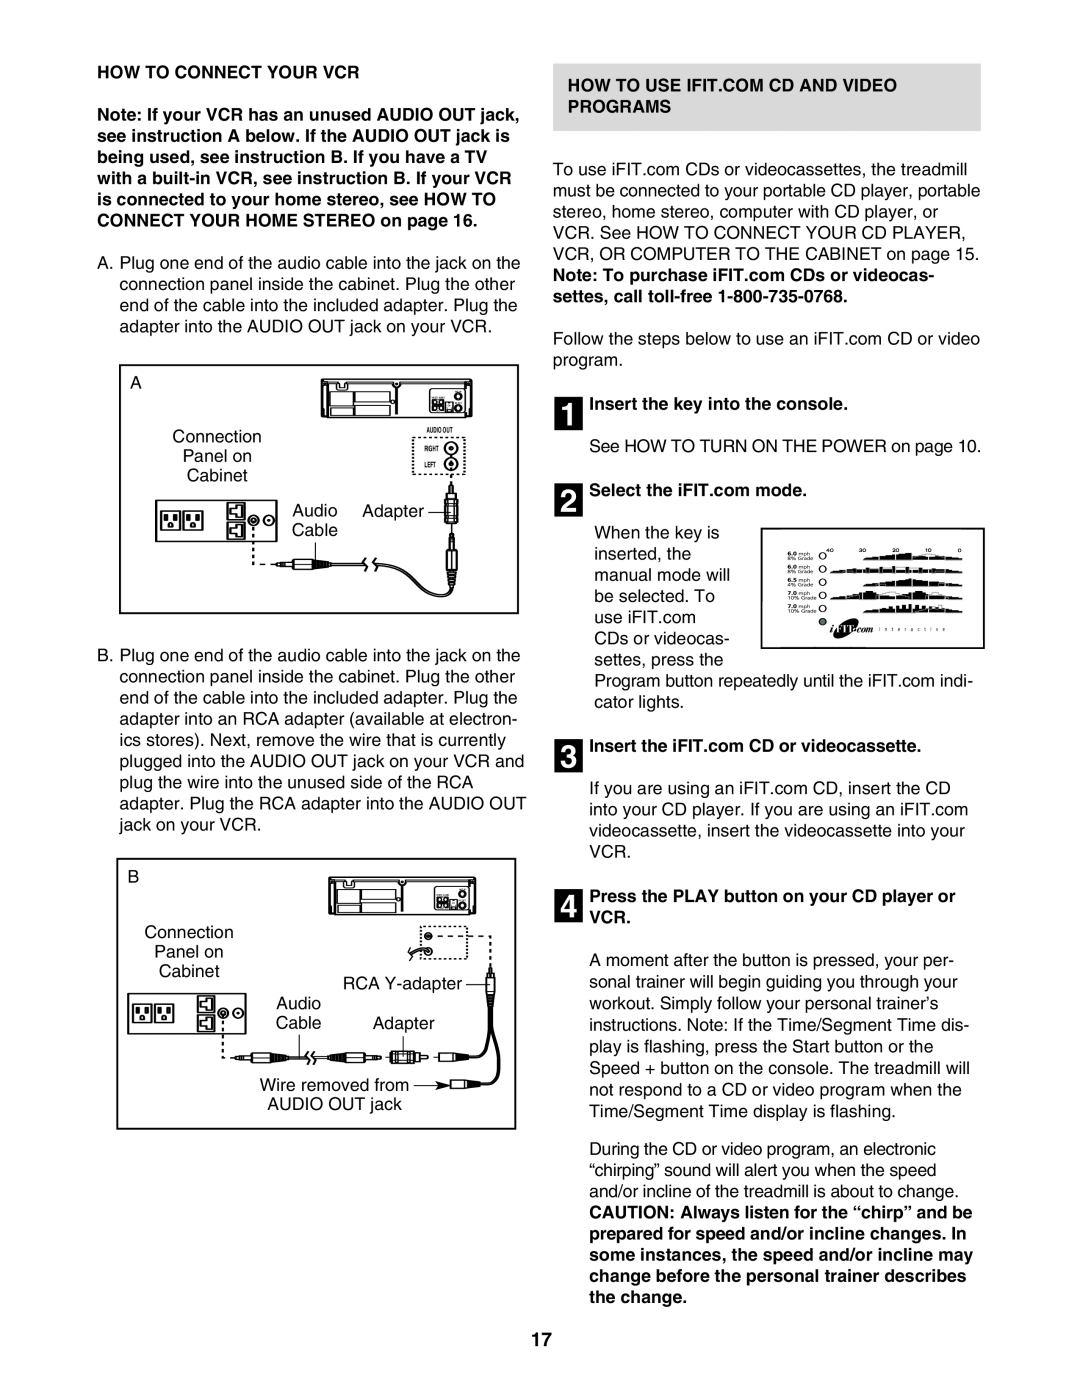 ProForm HGTL09111M How To Connect Your Vcr, How To Use Ifit.Com Cd And Video Programs, Insert the key into the console 